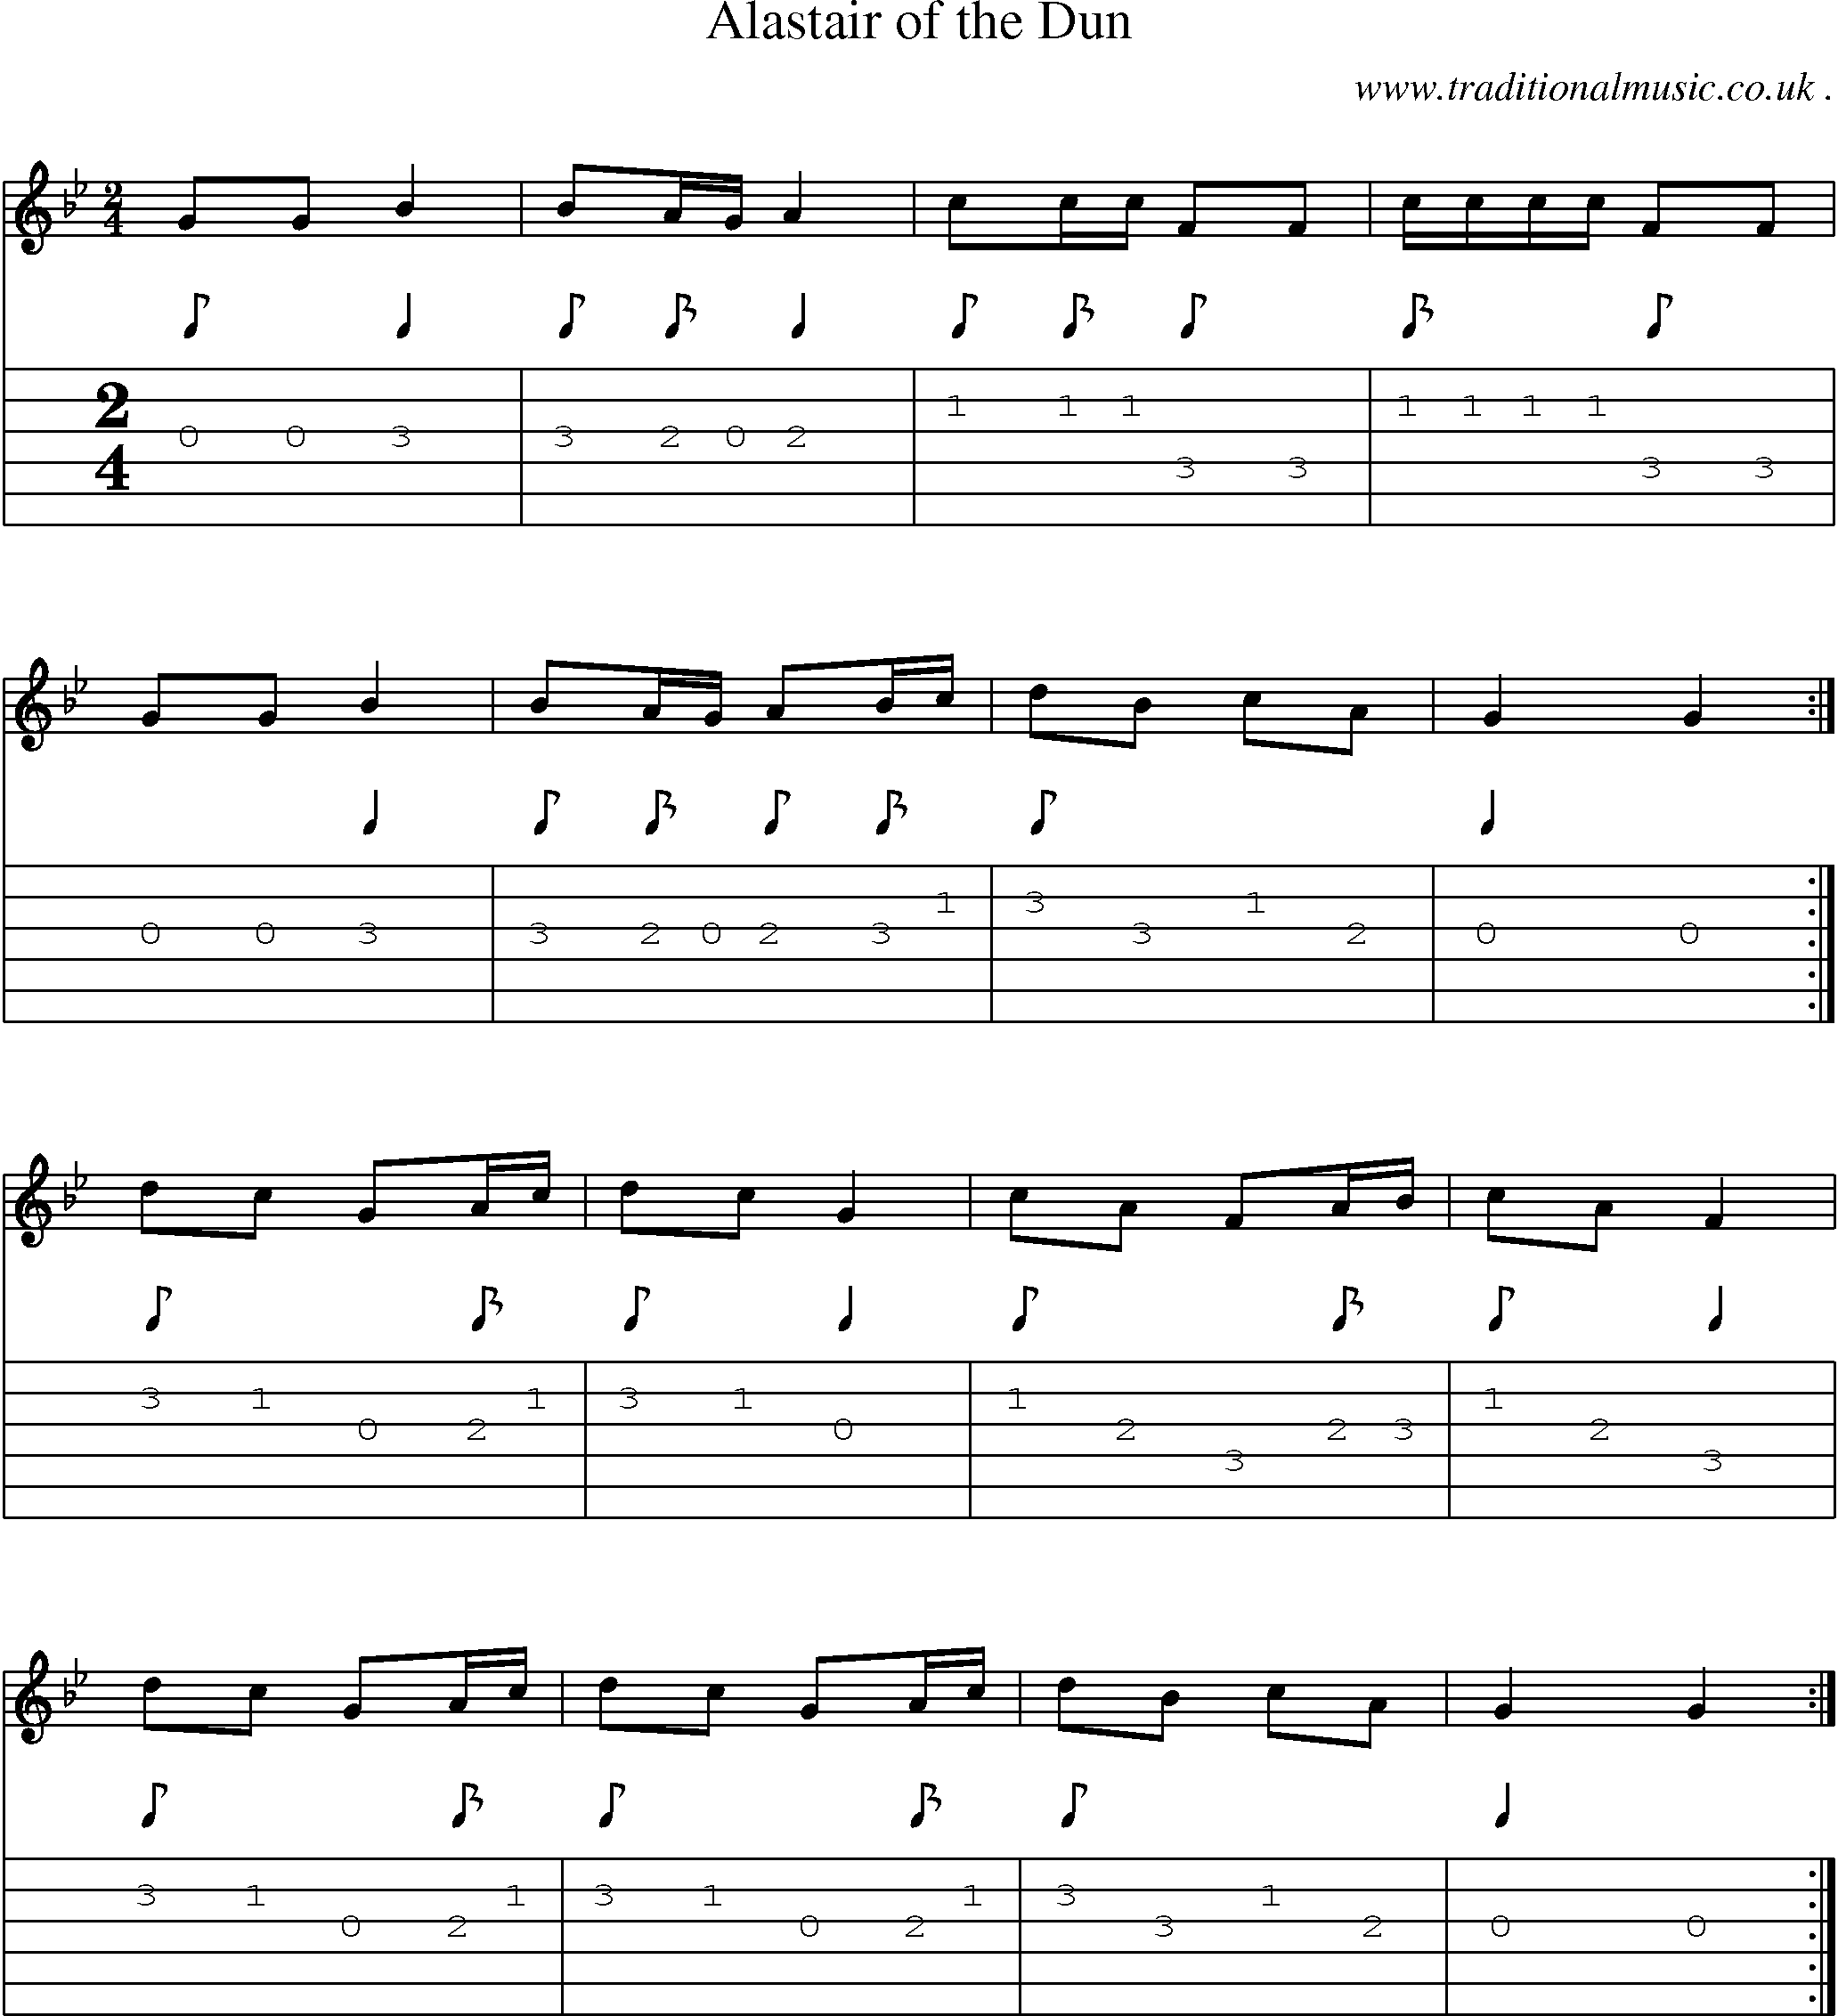 Sheet-music  score, Chords and Guitar Tabs for Alastair Of The Dun